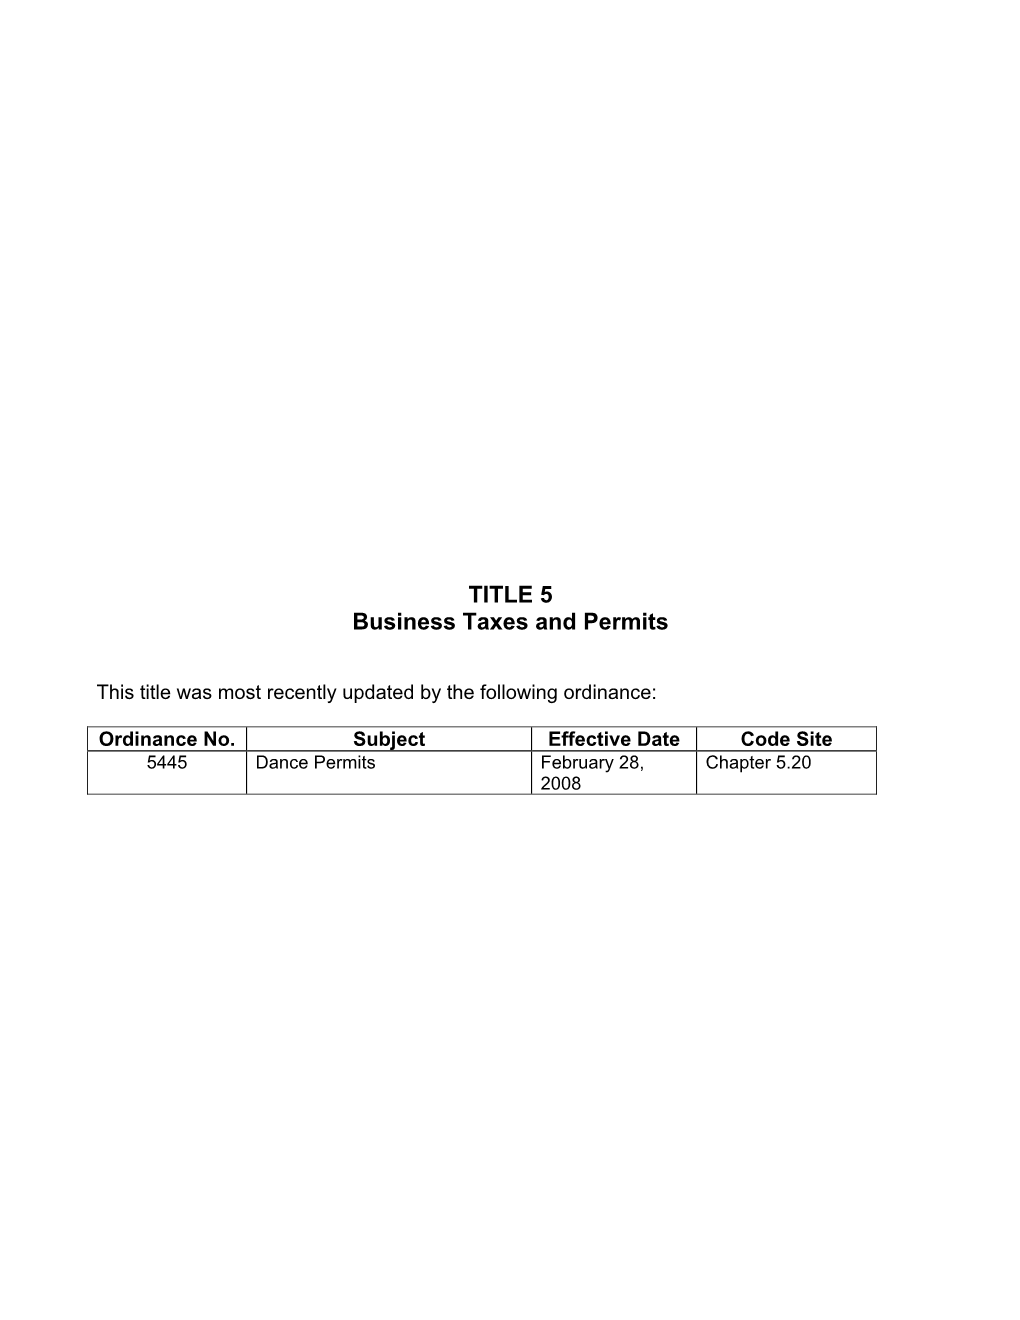 SBMC TITLE 5, Business Taxes and Permits